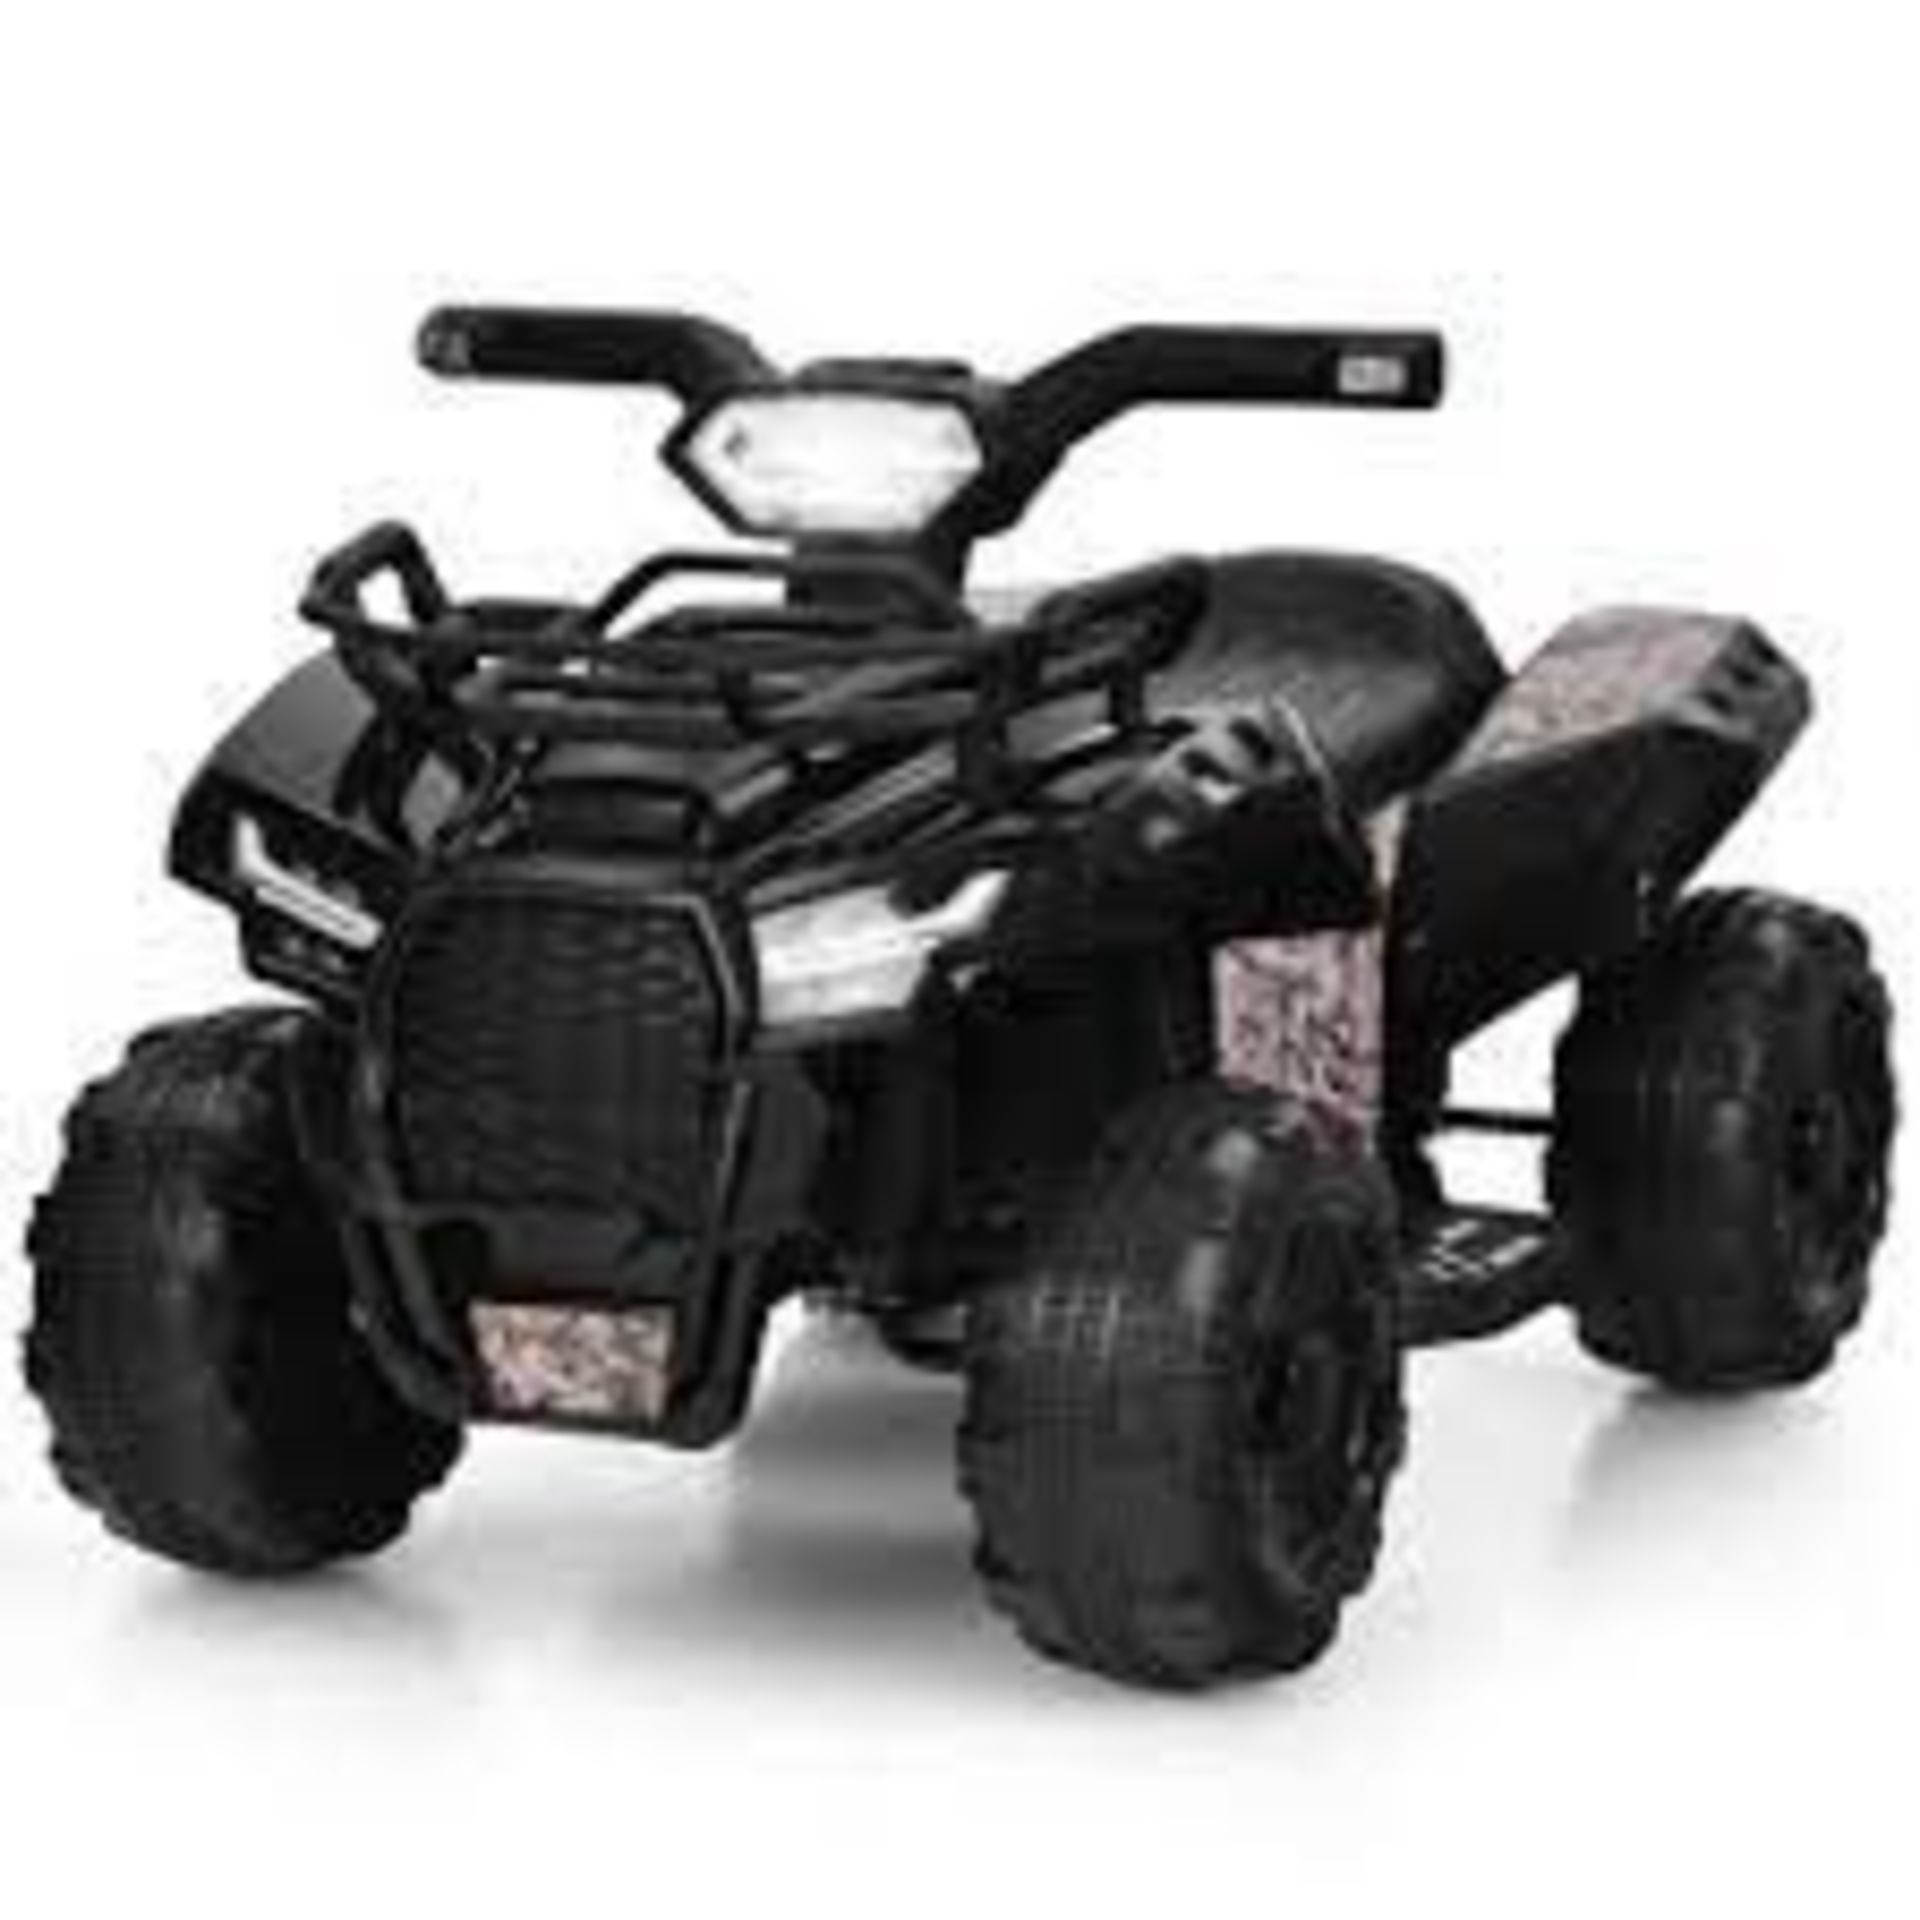 6V BATTERY POWERED QUAD BIKE WITH LED LIGHT HORN MUSIC AND STORAGE BOX. - ER53. *colour may vary*